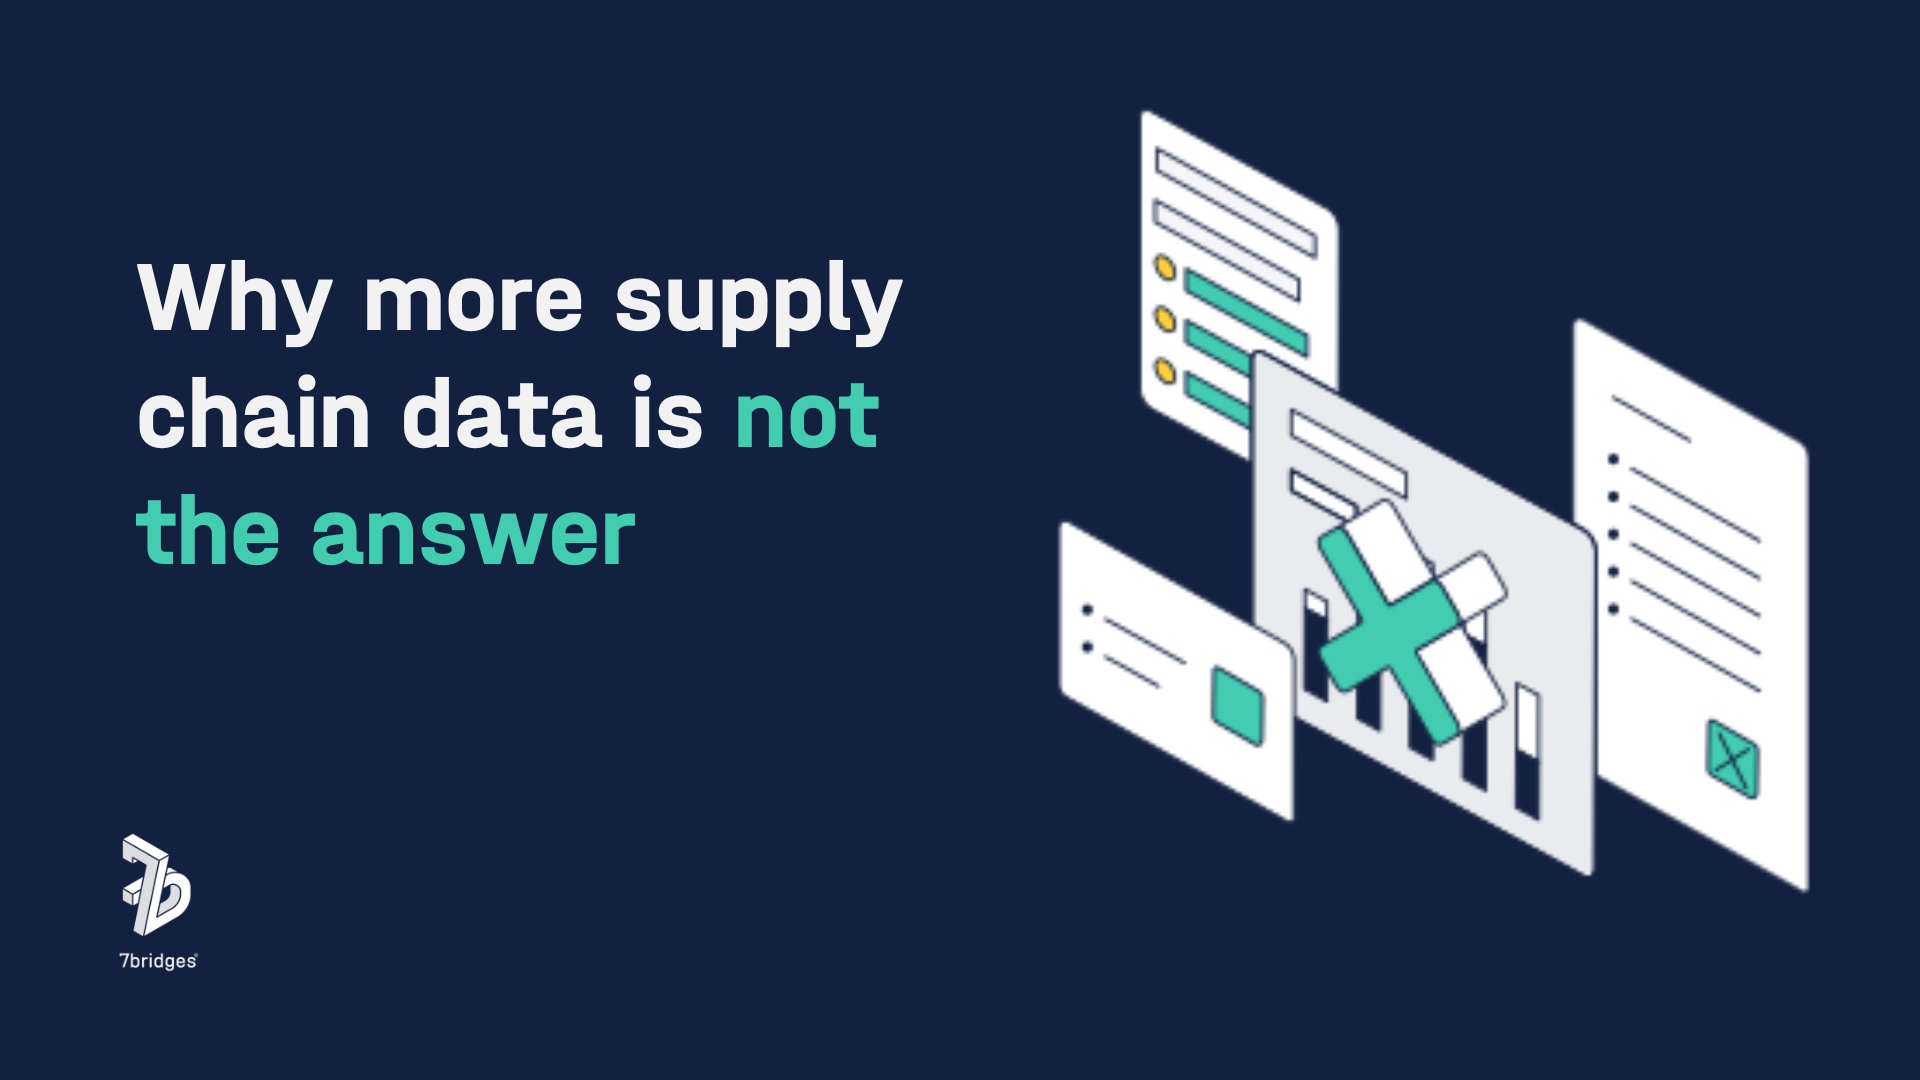 Blog title 'Why more supply chain data isn't the answer' with crossed out spreadsheet graphic on blue background